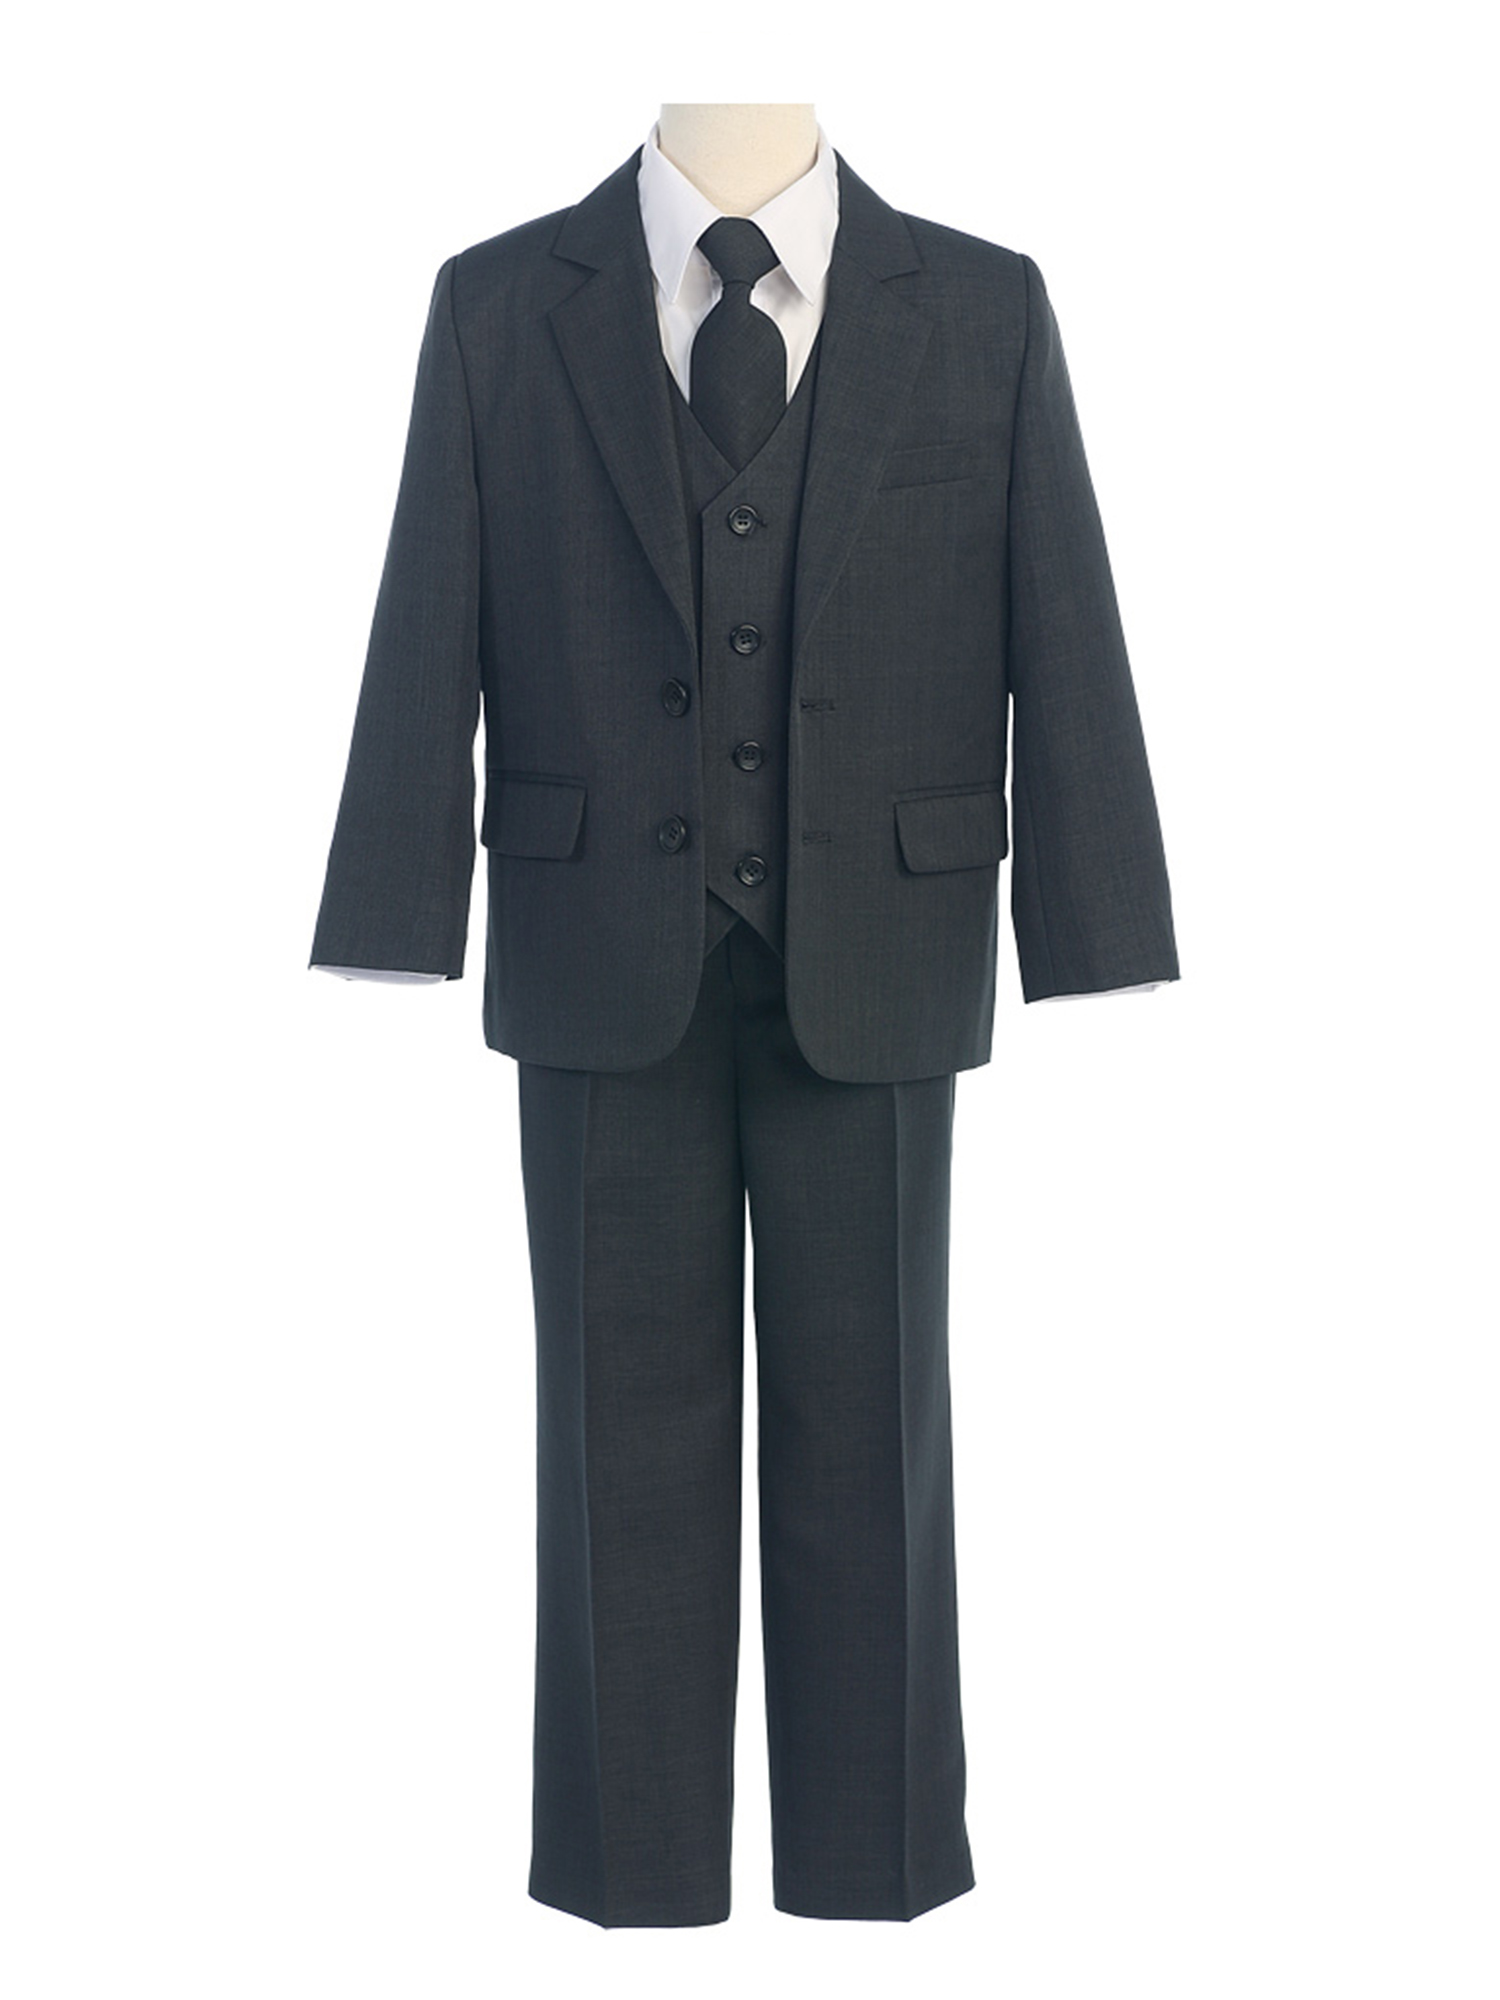 COLE Boys Suit with Shirt and Vest (5-Piece) - Charcoal Grey - Size 8